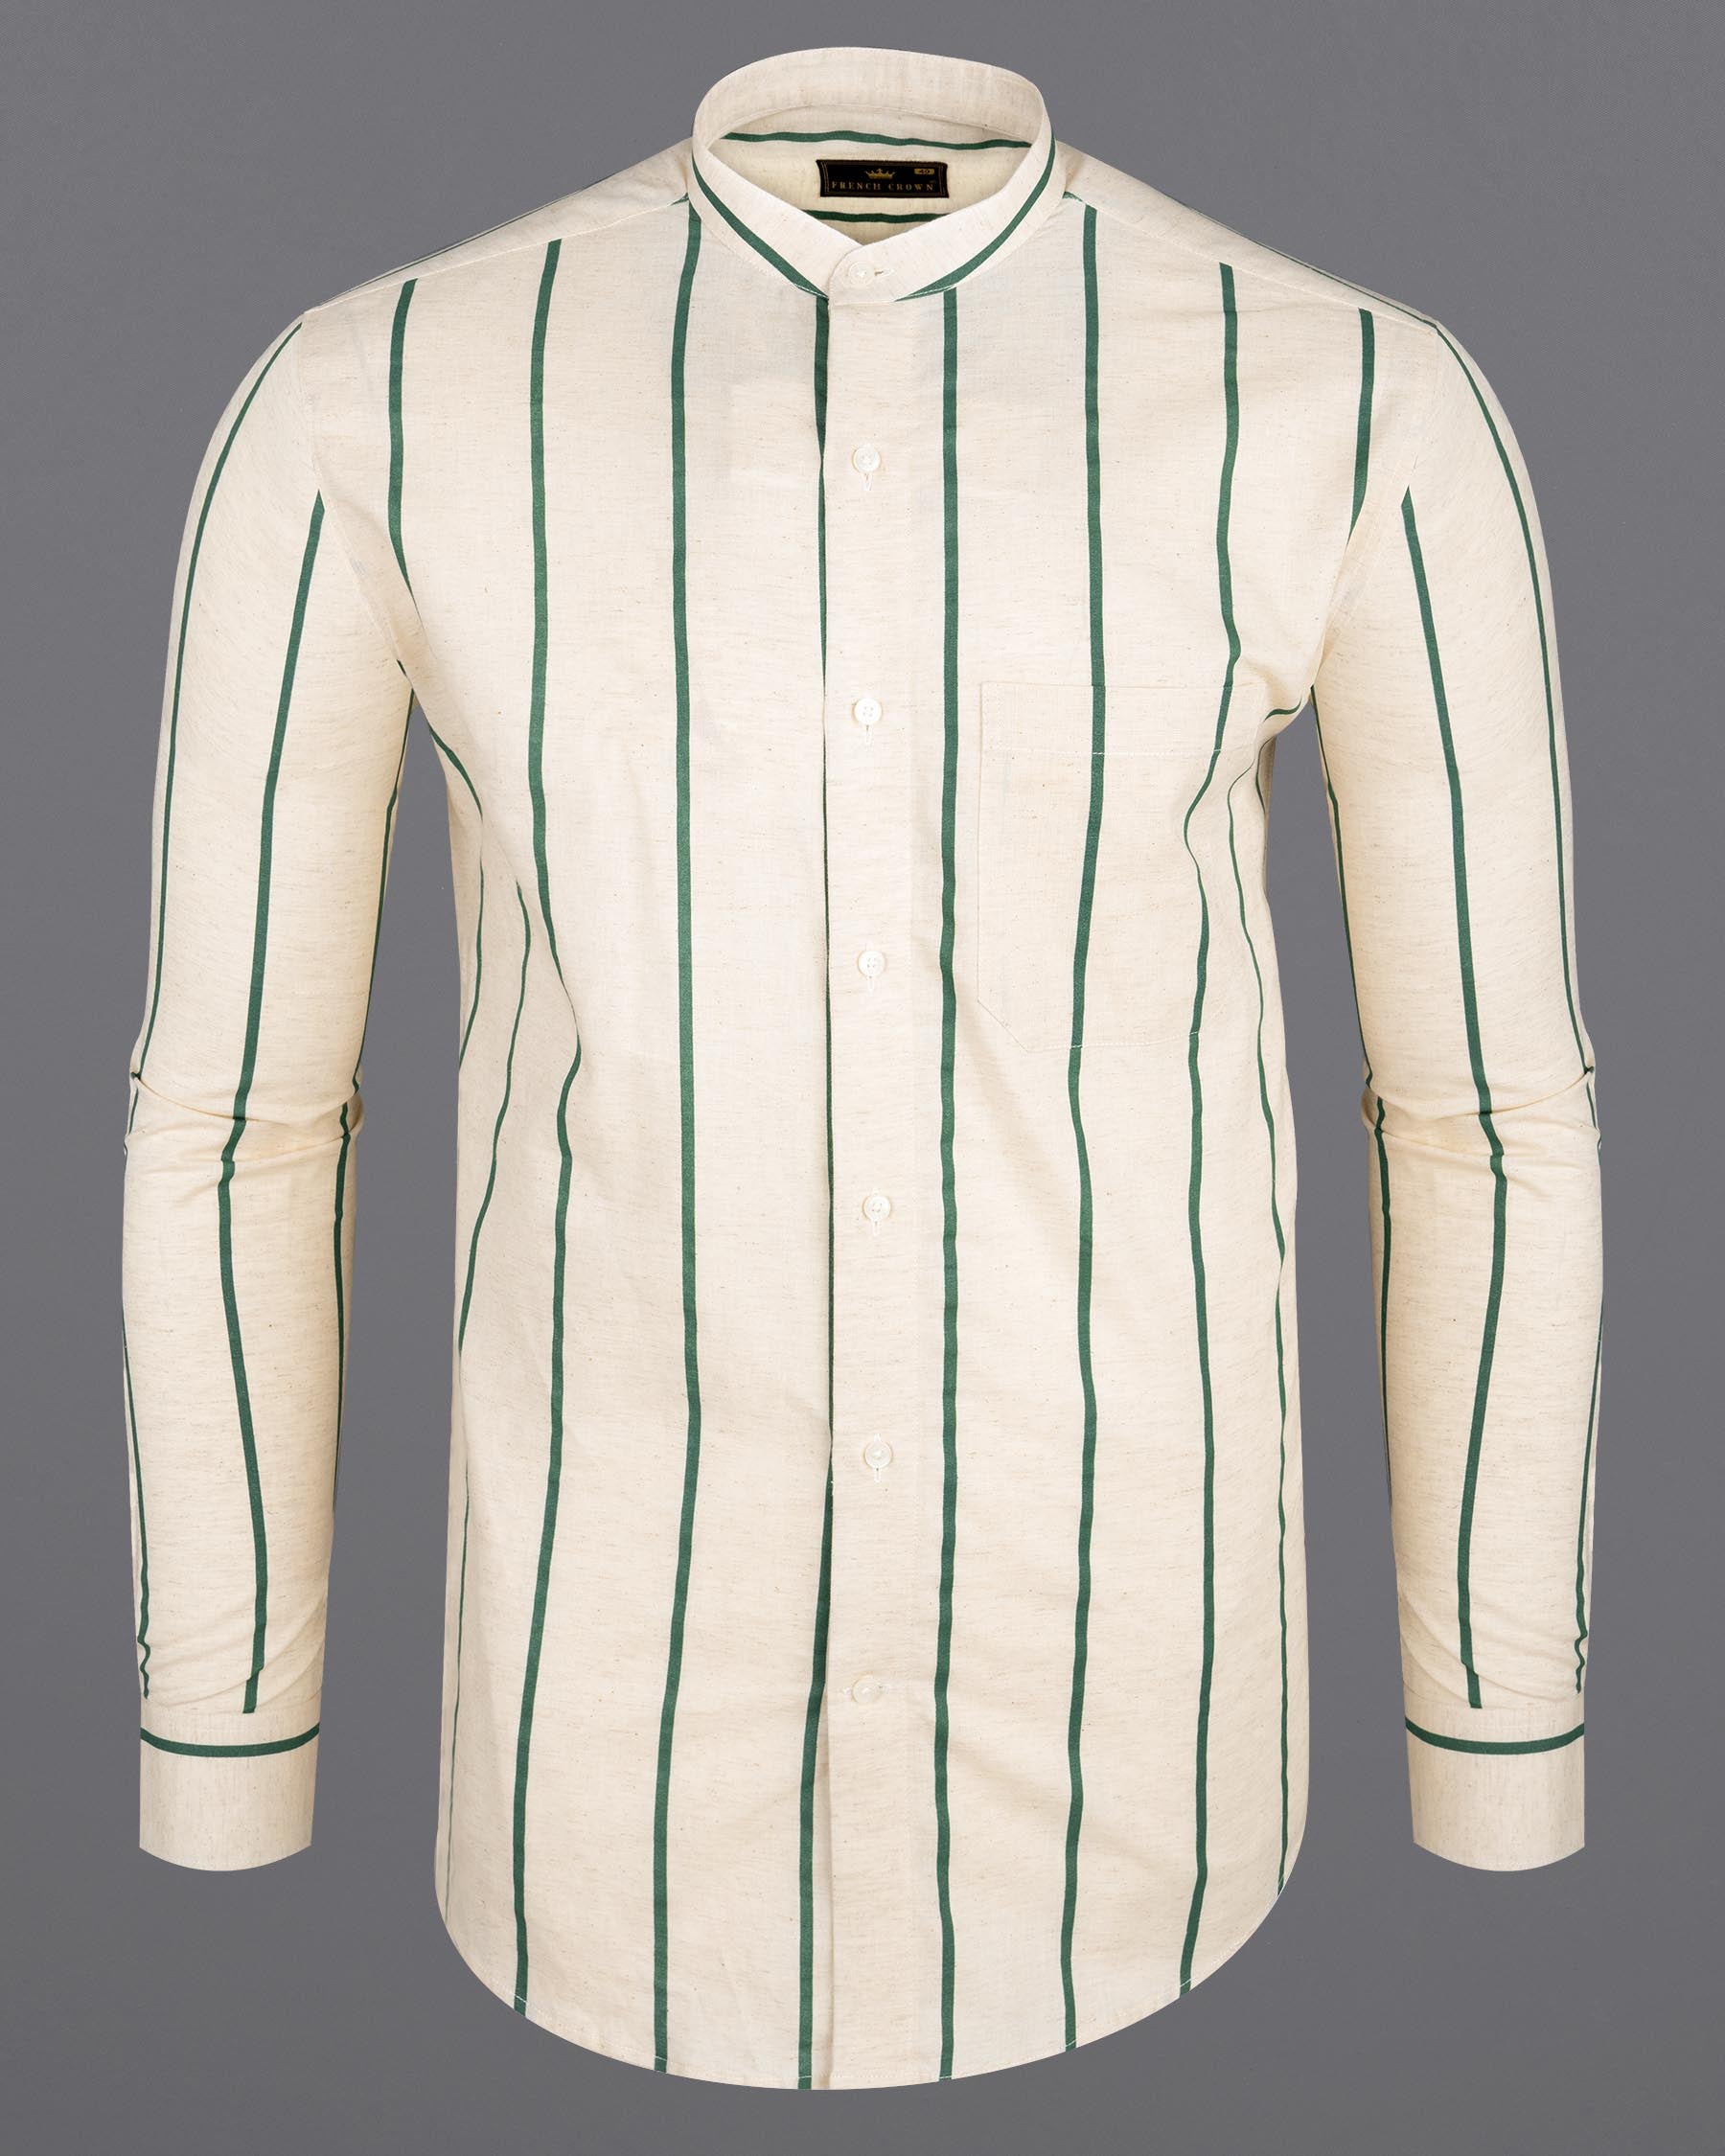 Ecru Brown with Oxley Green Striped Luxurious Linen Shirt 7010-M-38,7010-M-38,7010-M-39,7010-M-39,7010-M-40,7010-M-40,7010-M-42,7010-M-42,7010-M-44,7010-M-44,7010-M-46,7010-M-46,7010-M-48,7010-M-48,7010-M-50,7010-M-50,7010-M-52,7010-M-52